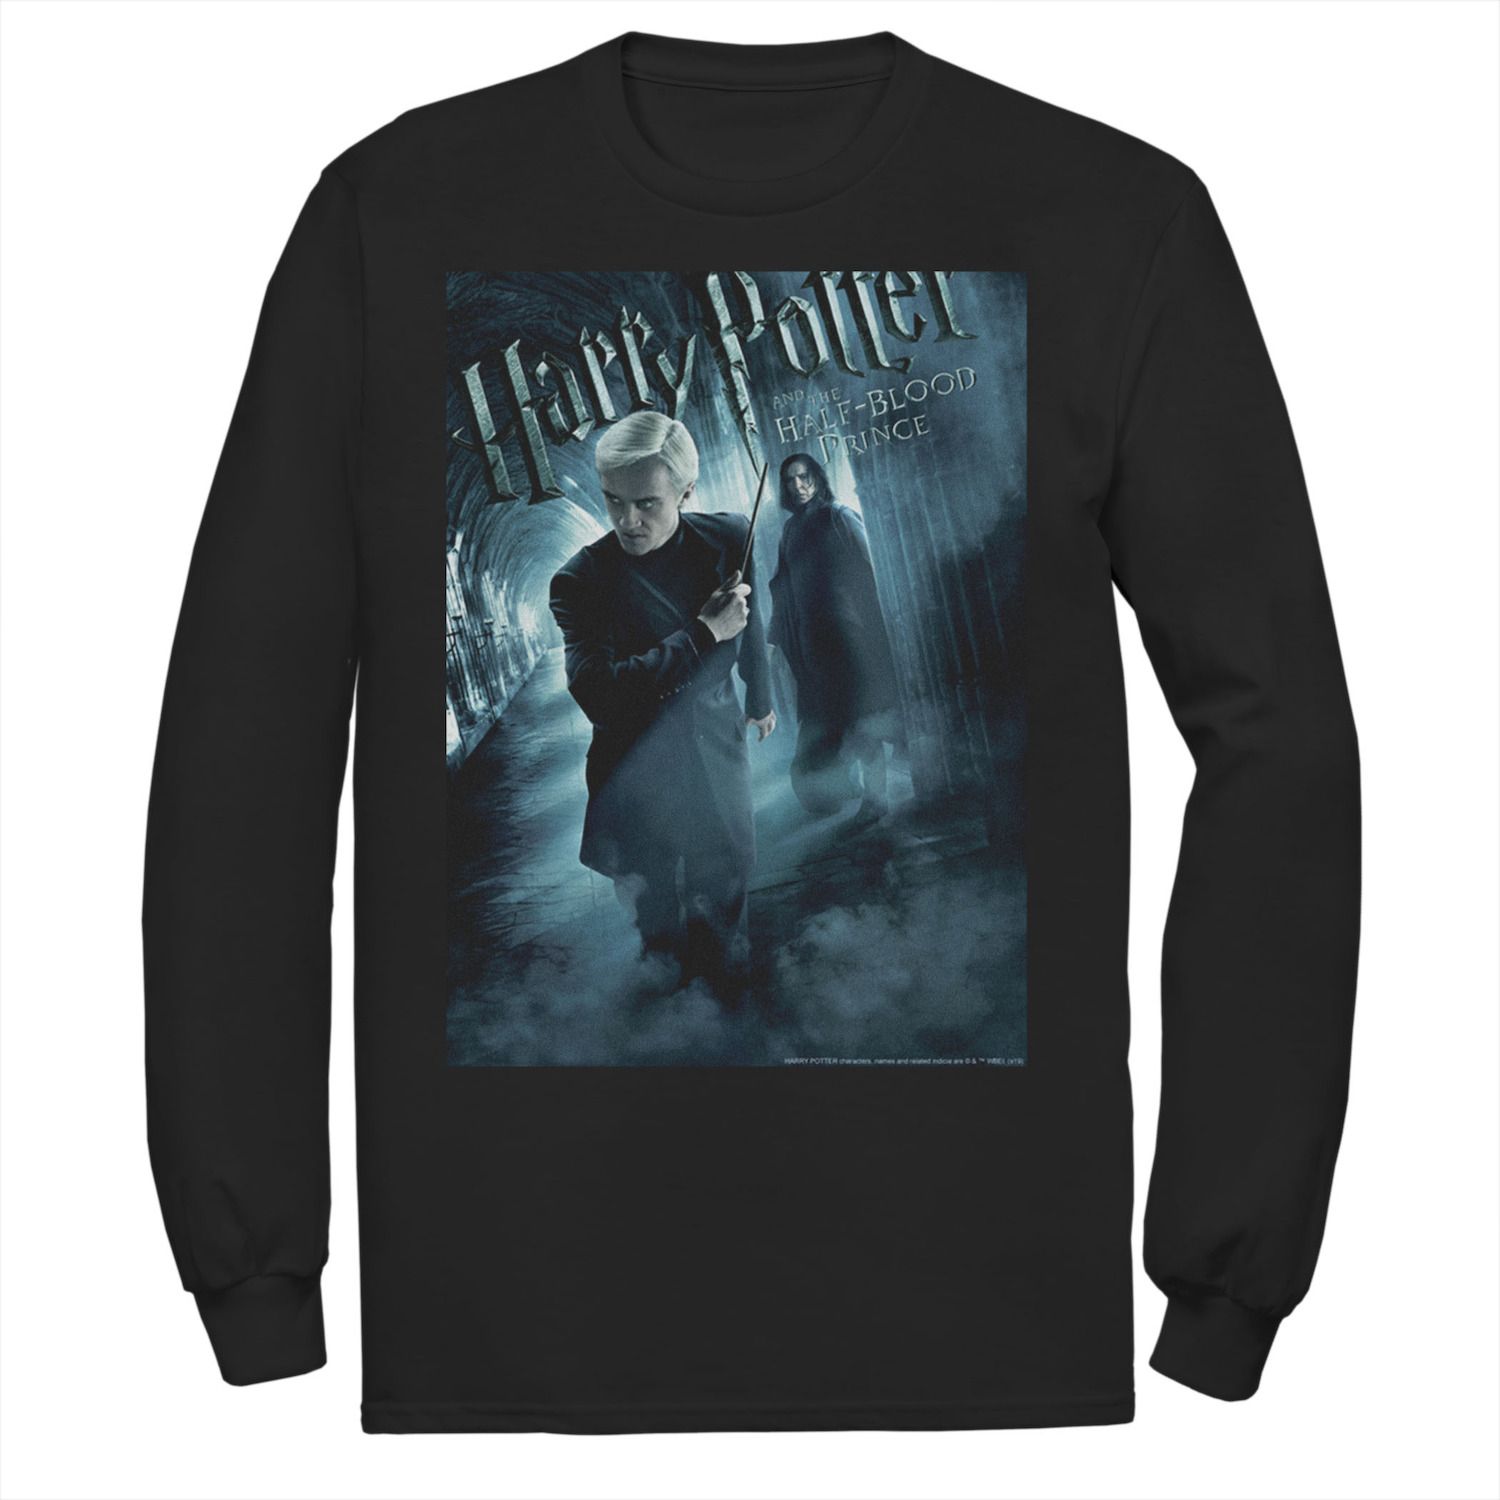 Image for Harry Potter Men's Half-Blood Prince Draco And Snape Poster Long Sleeve Graphic Tee at Kohl's.